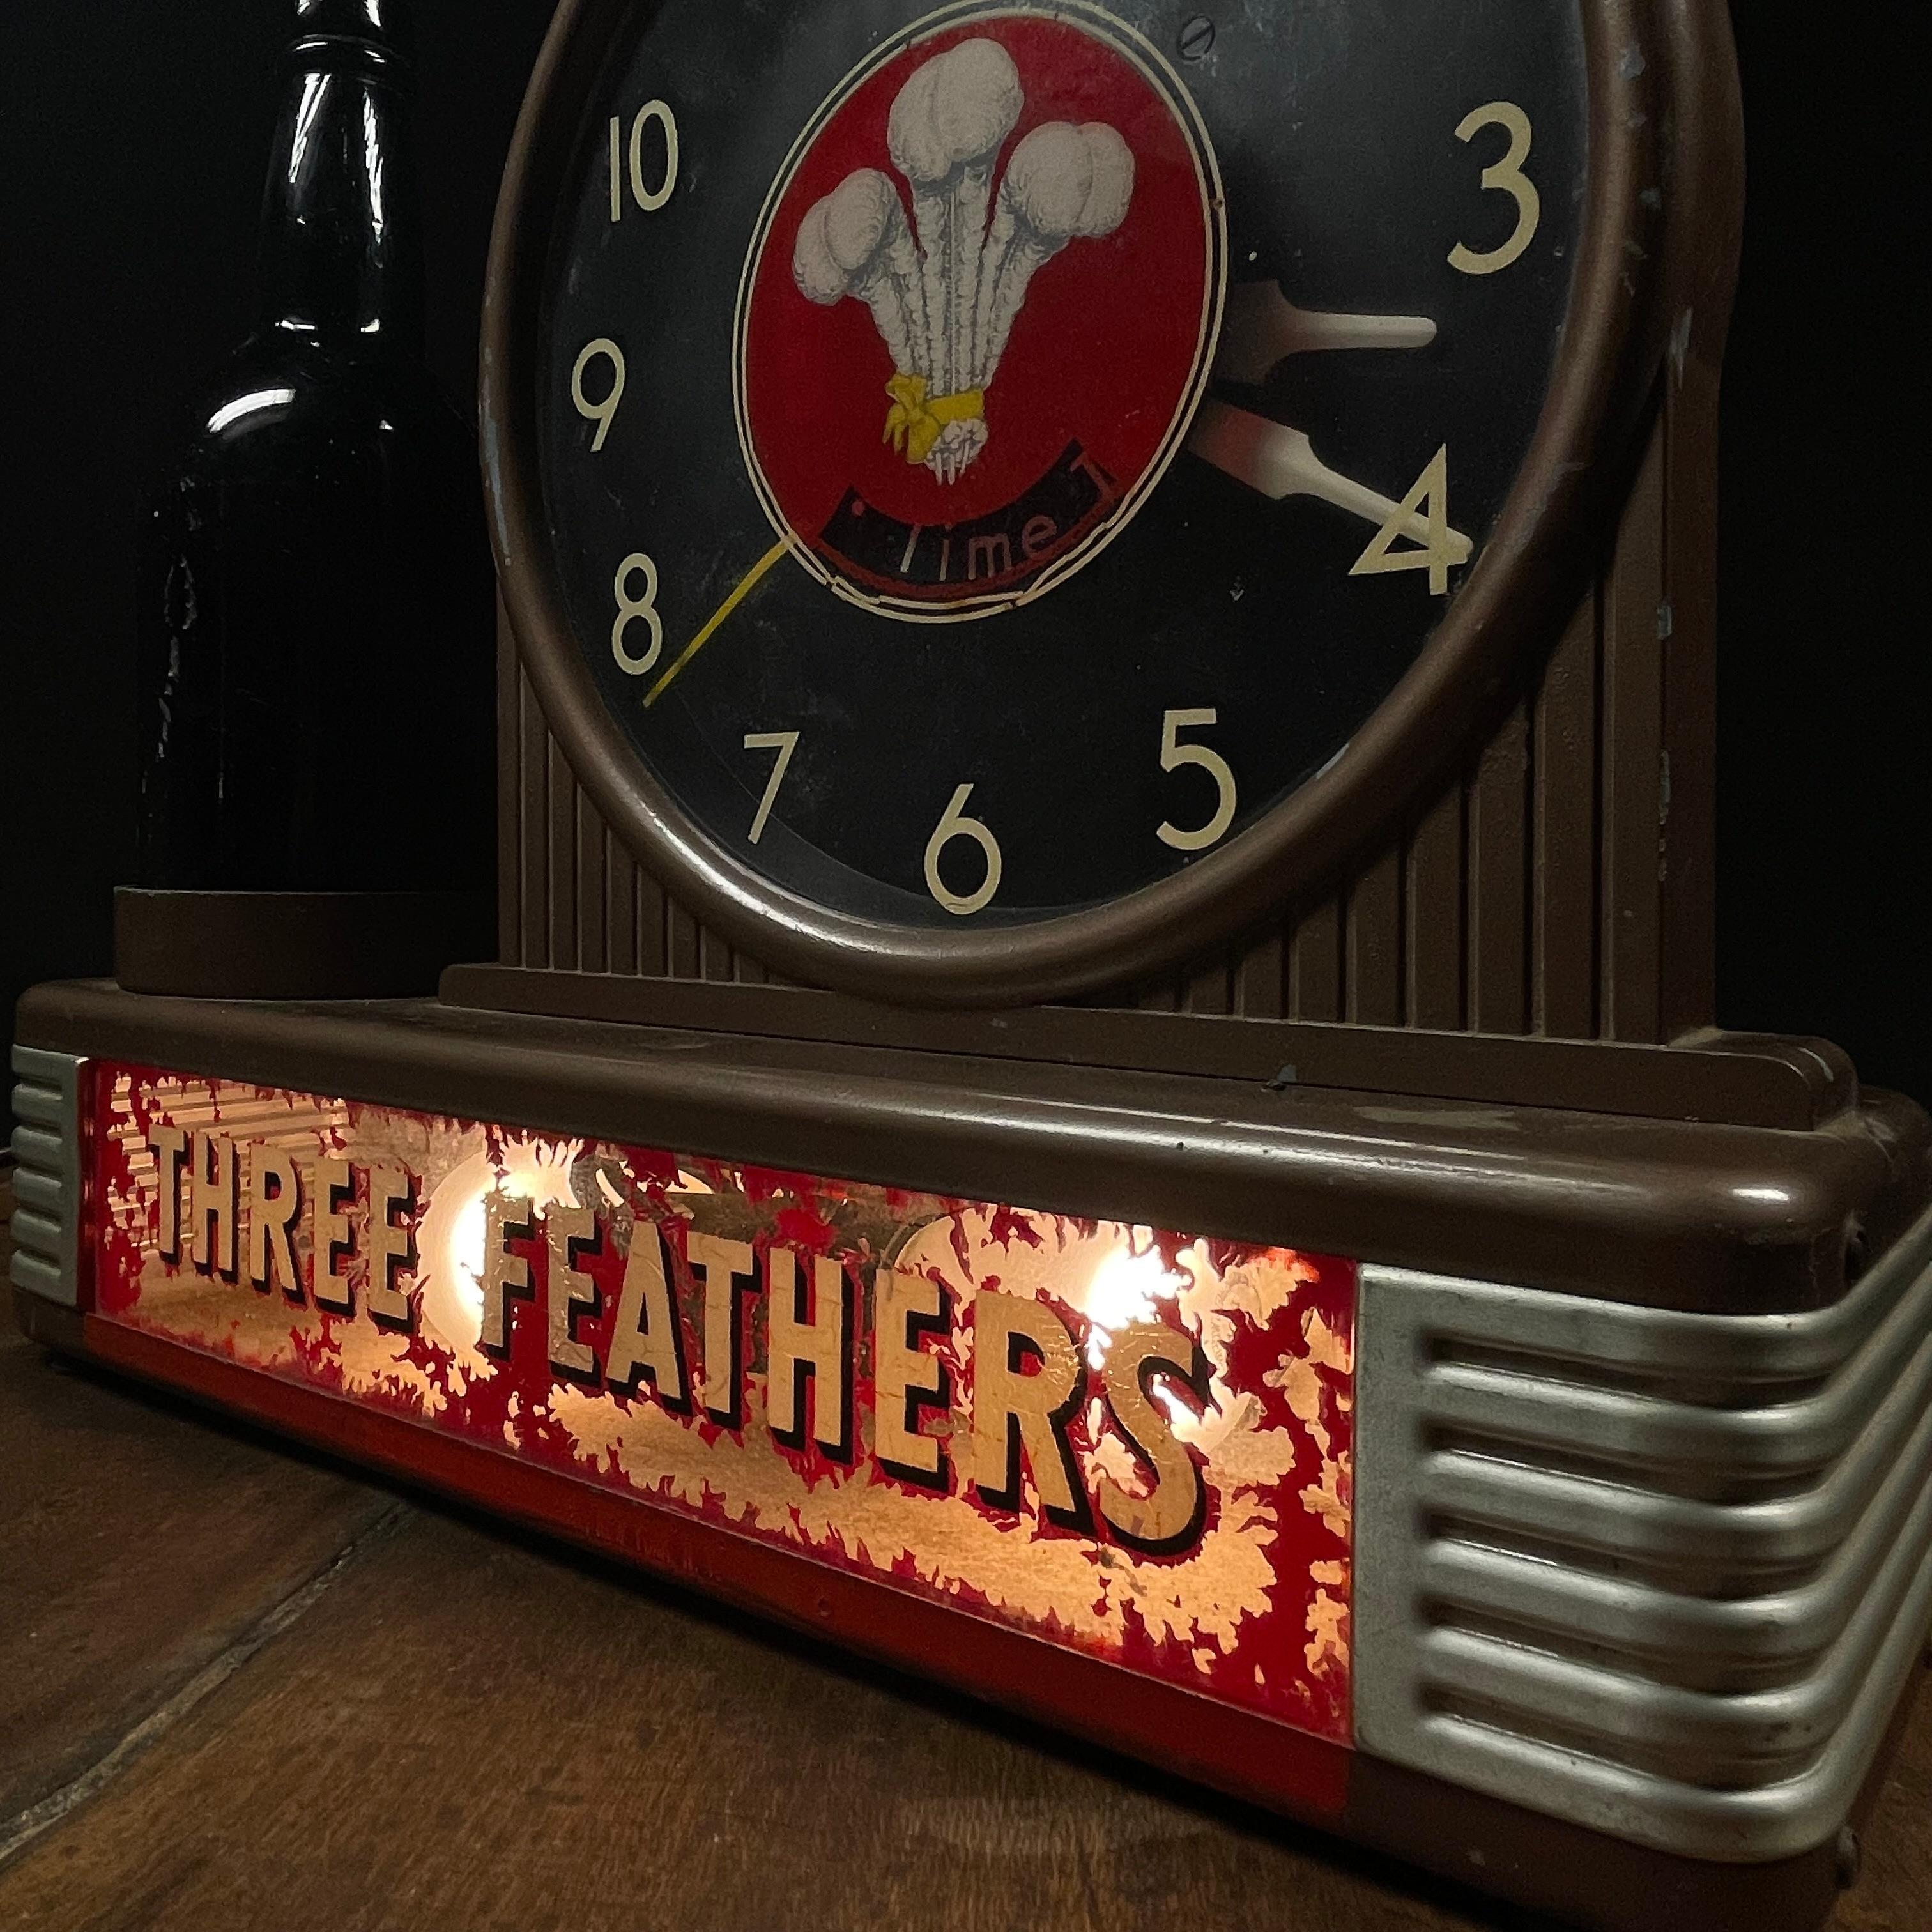 A great mcm advertising working whiskey sign light up box . A great piece of advertising in original condition .   
 Three Feathers Blended Whiskey is a vintage American blend, produced by Schenley in the 1950s and exported for the Italian market.